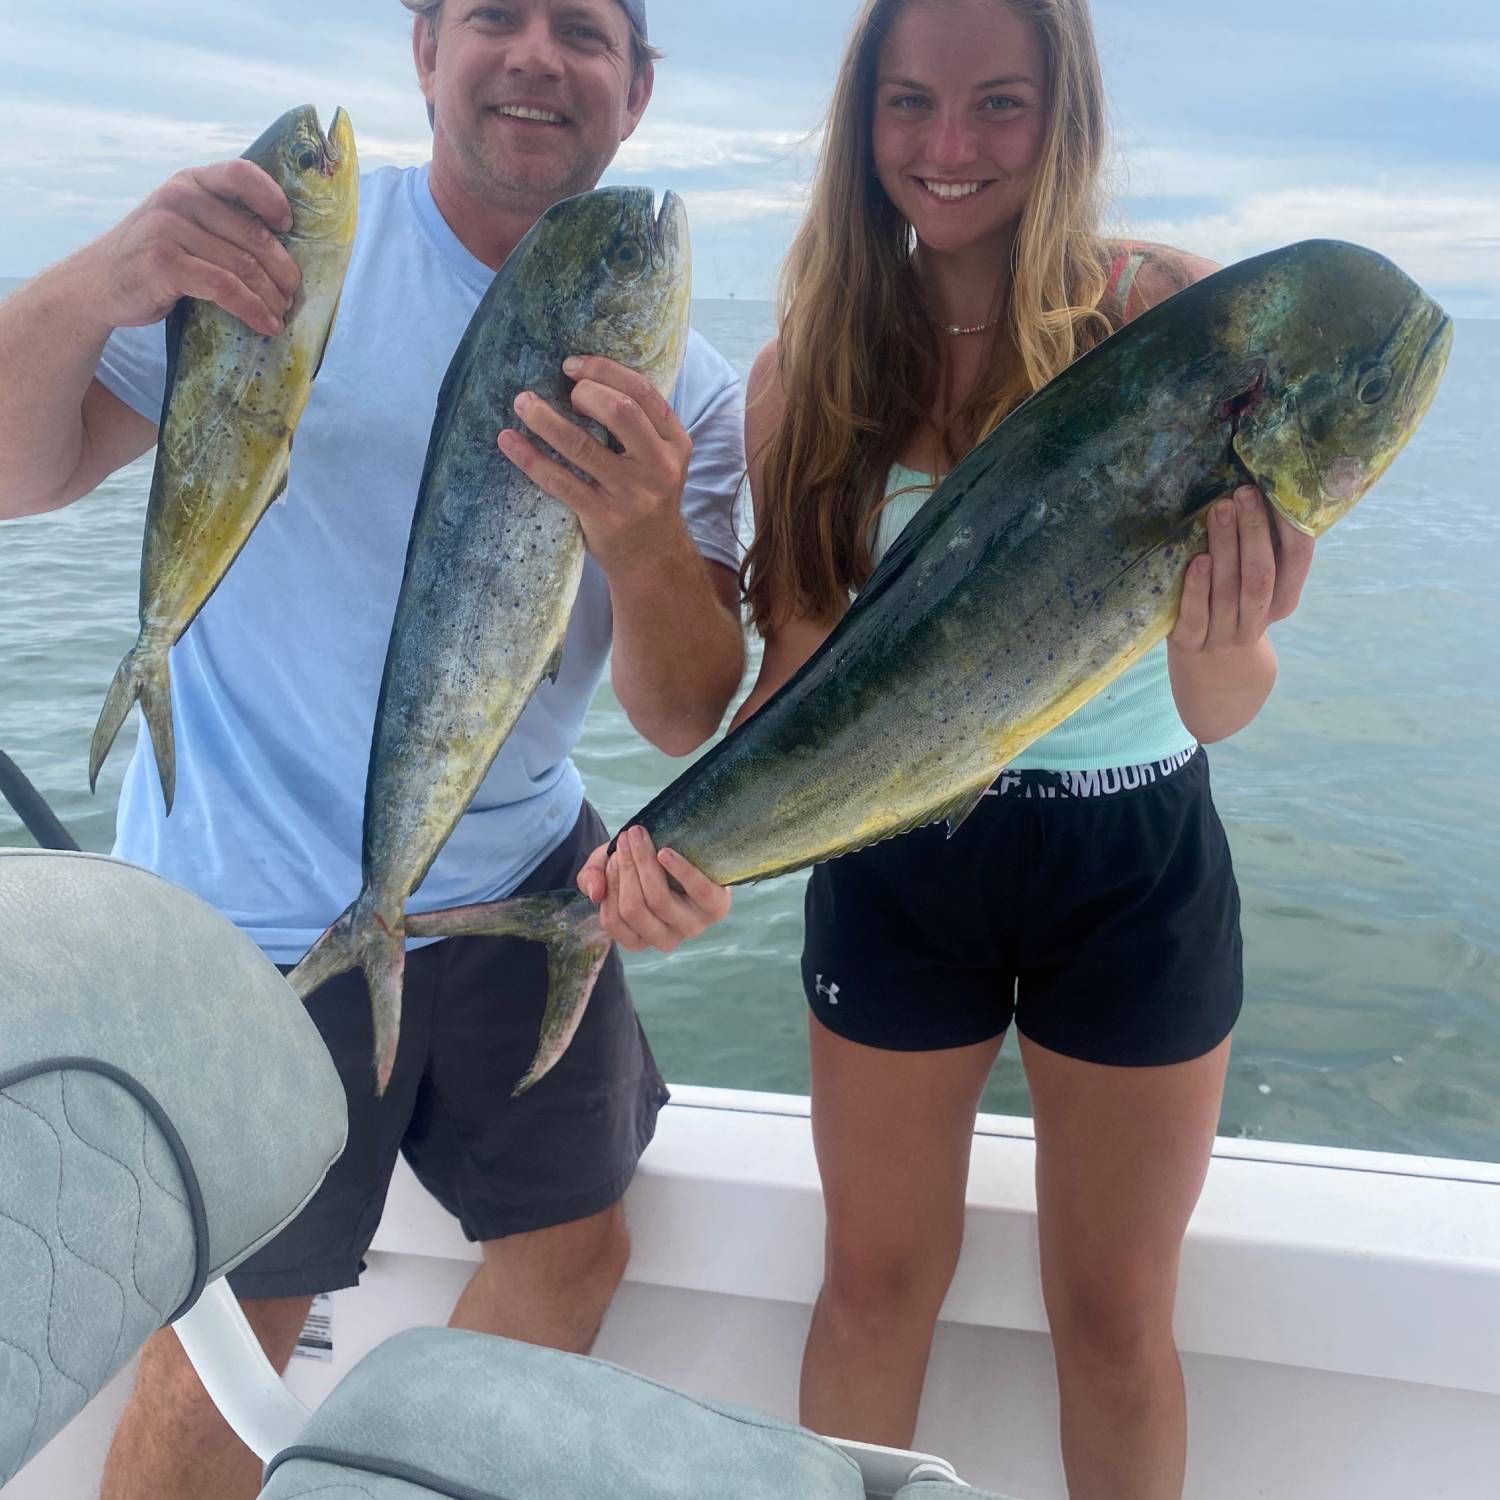 This is a birthday fishing trip with my daughters. My birthday is June 4th which usually coinci...